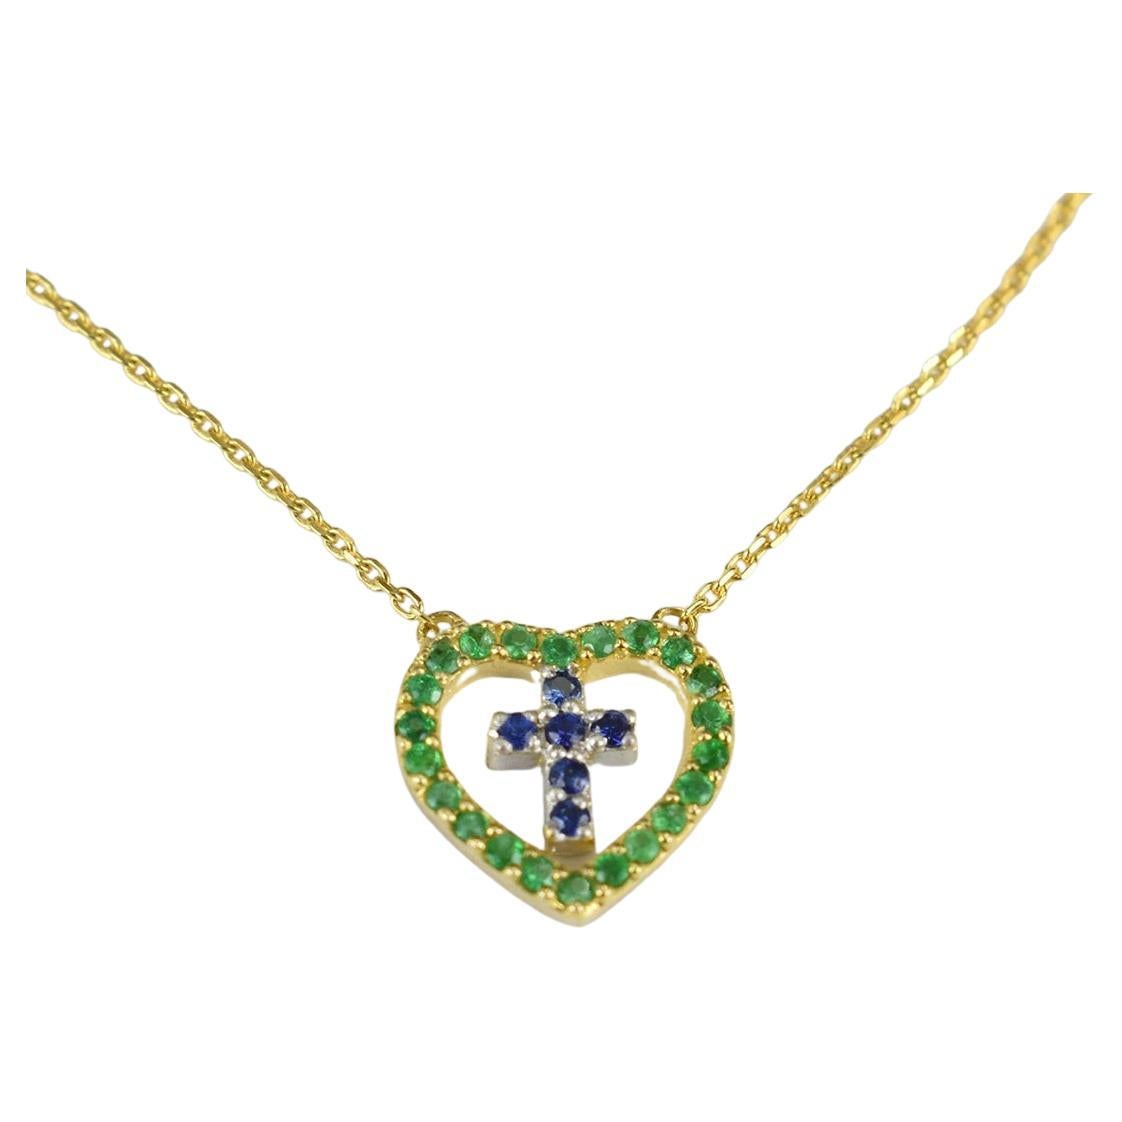 Genuine Emerald and Blue Sapphire Necklace is made of 18k solid gold.
Available in three colors of gold: White Gold / Rose Gold / Yellow Gold.

Beautiful little minimalist gold necklace is adorned with natural AAA quality Blue Sapphire and Emerald